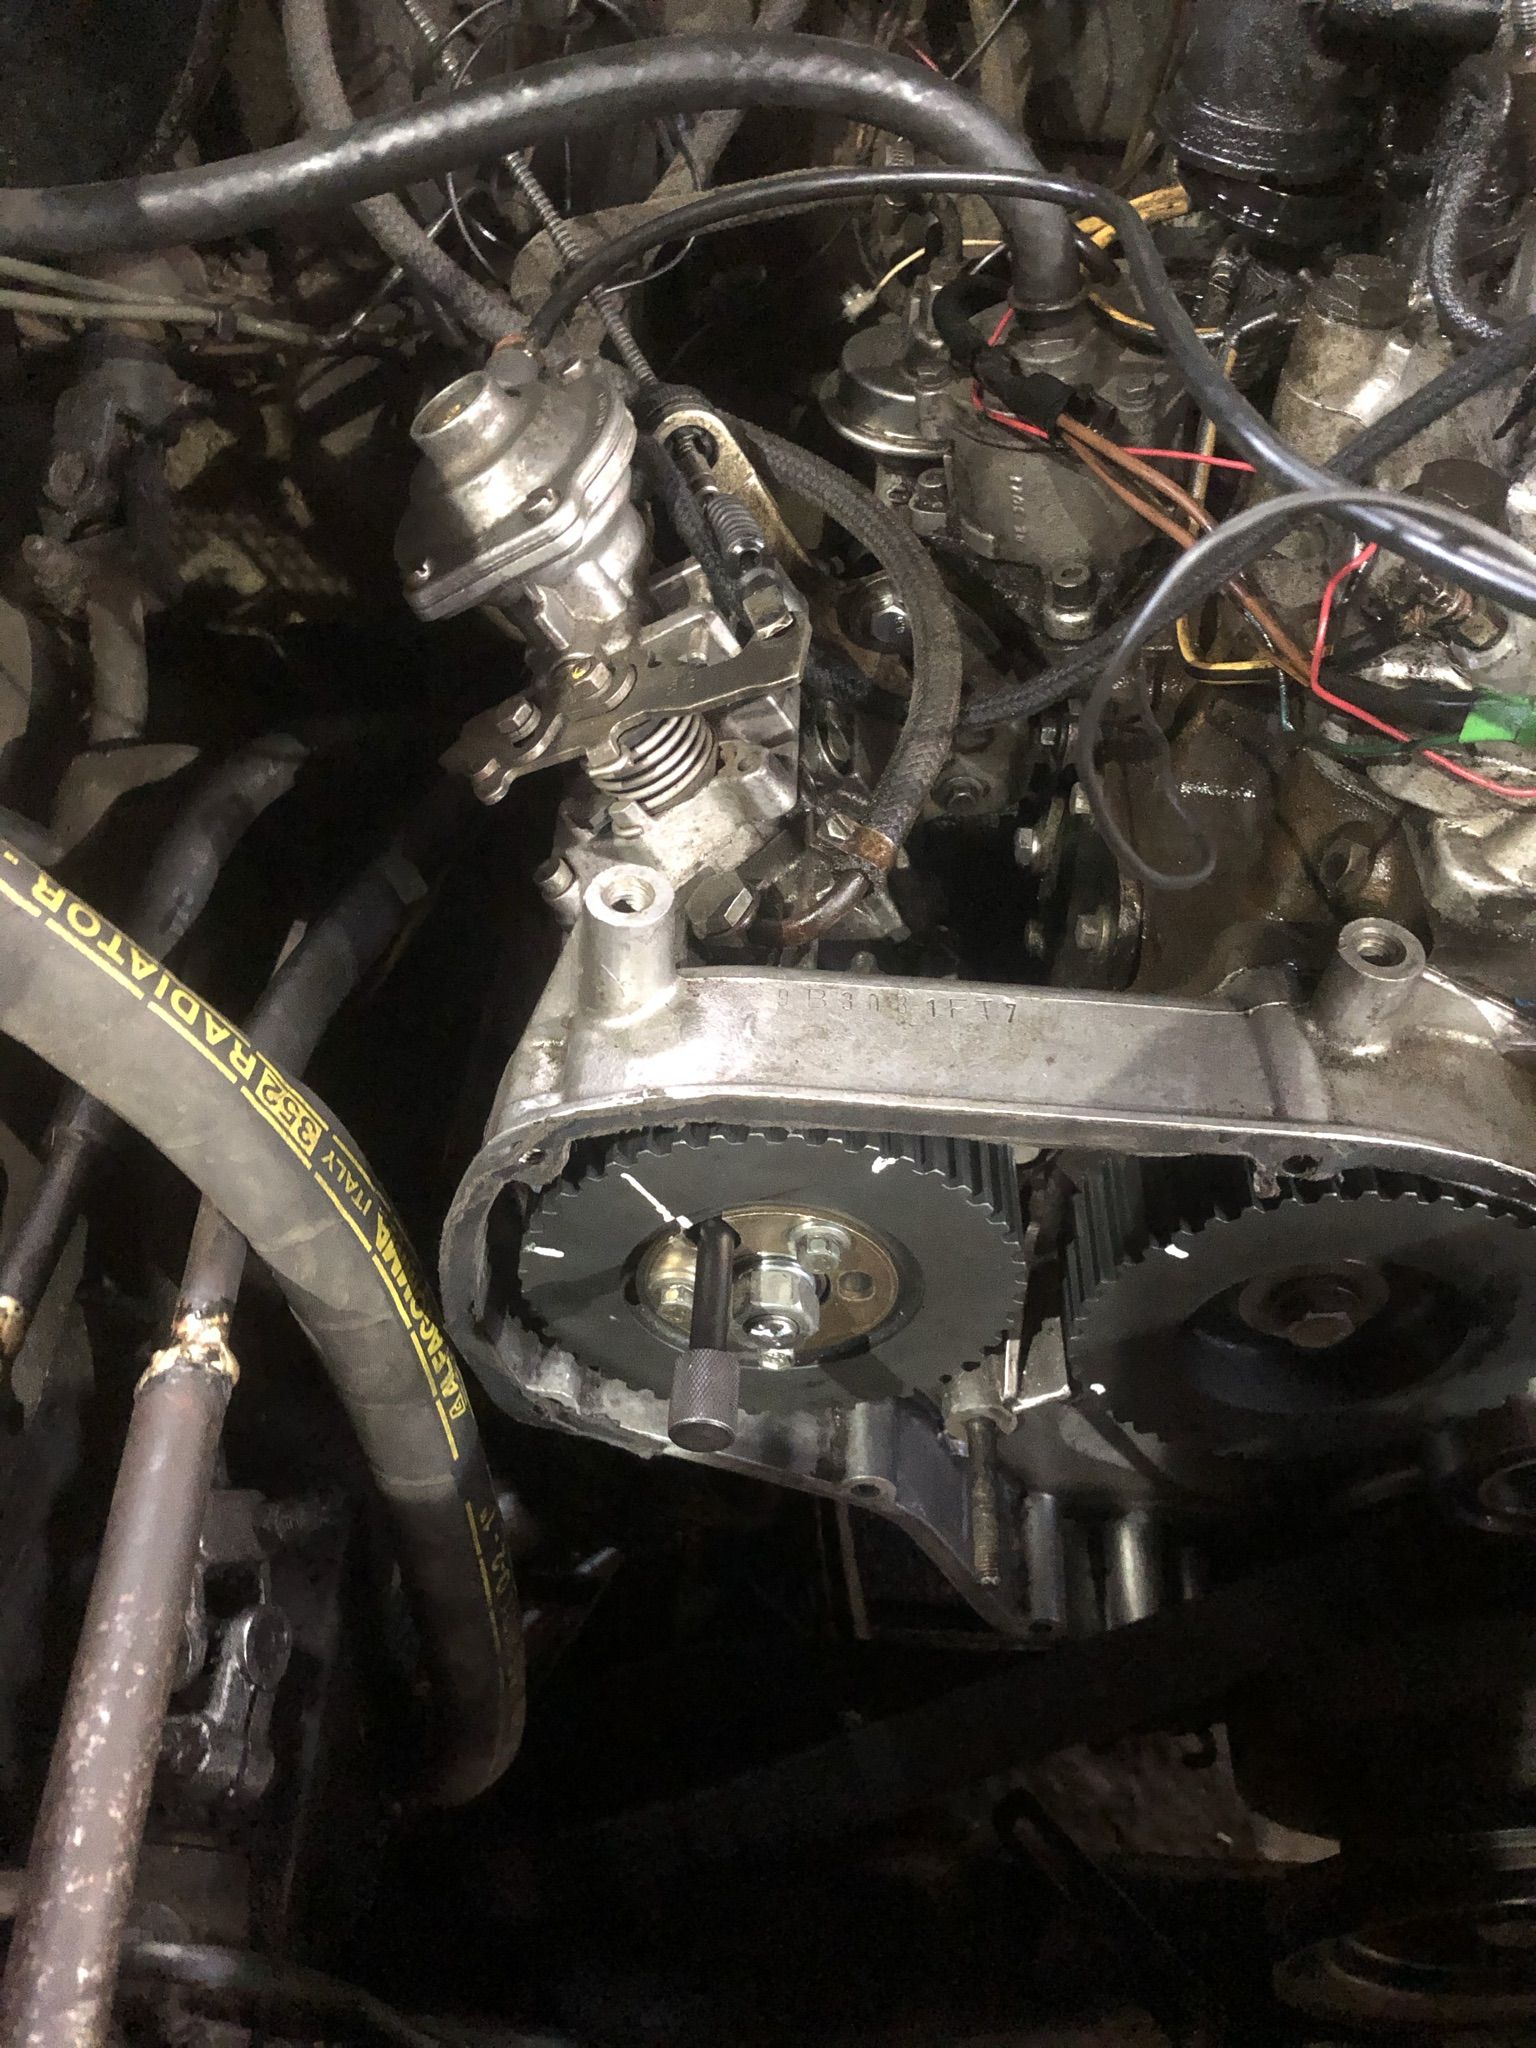 Water leak in Timing case, | Page 3 | LandyZone - Land Rover Forum